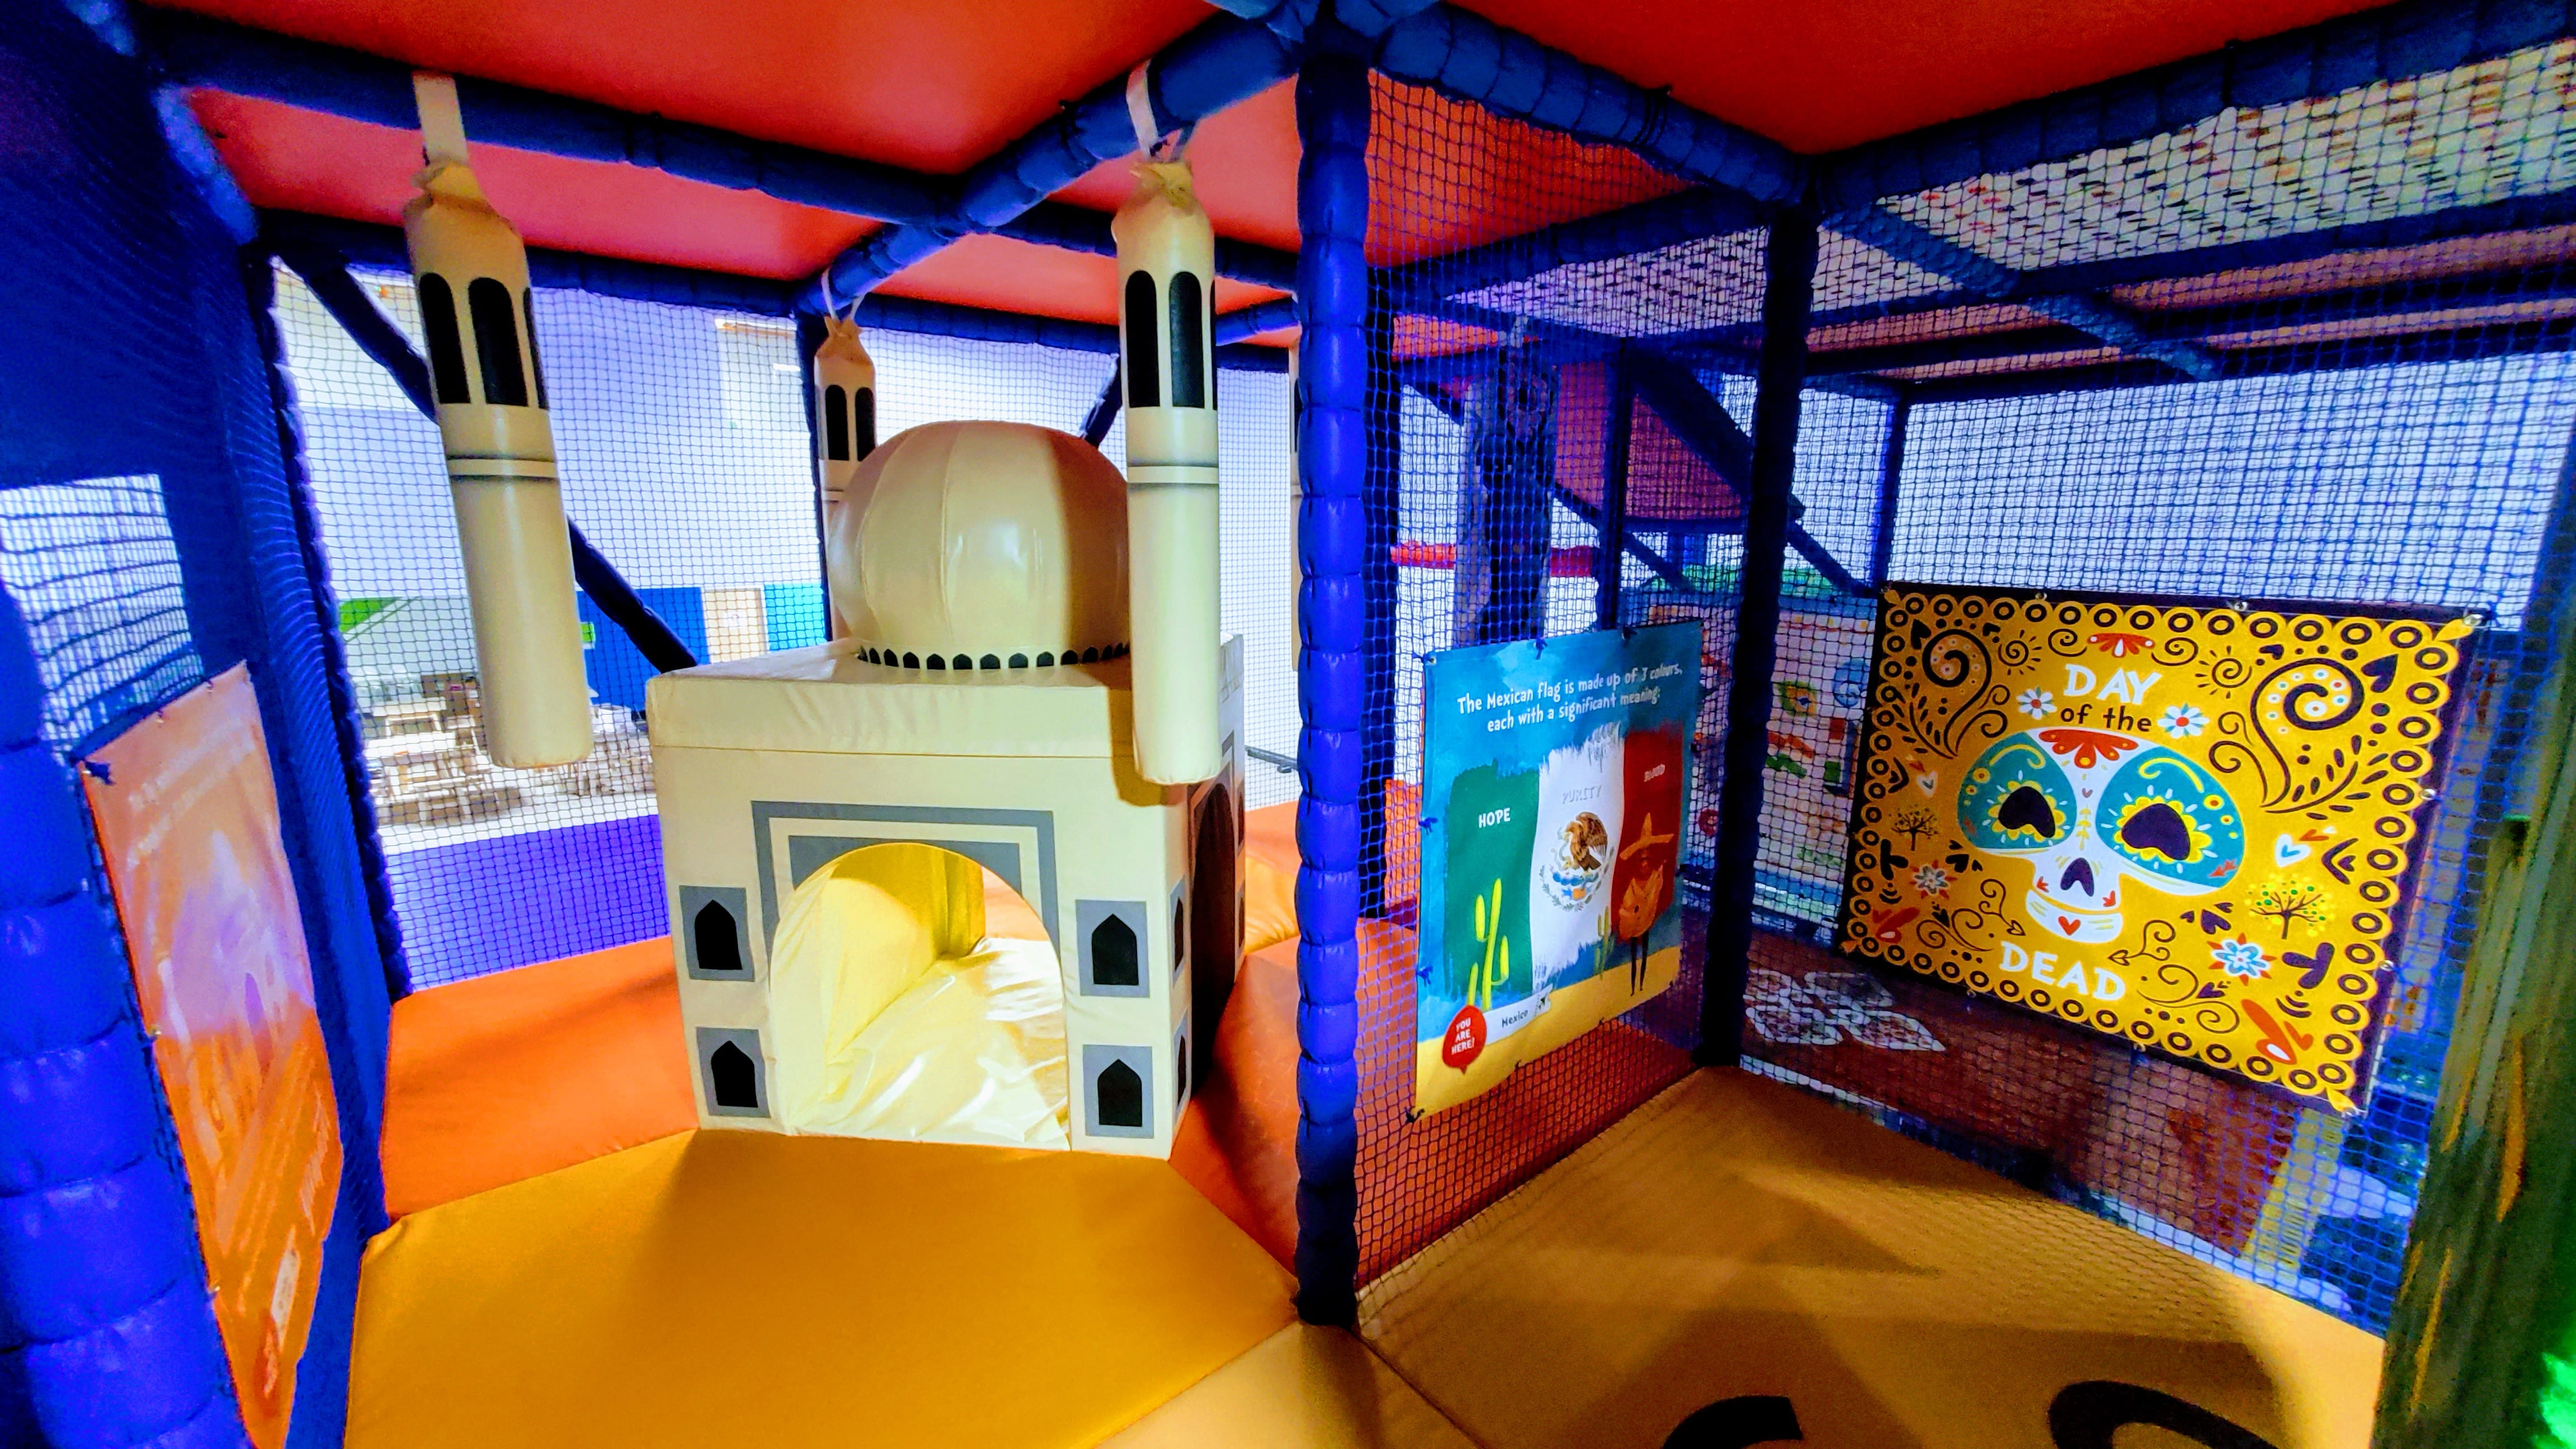 Indoor Places for Jumping Fun in Austin – Do512 Family